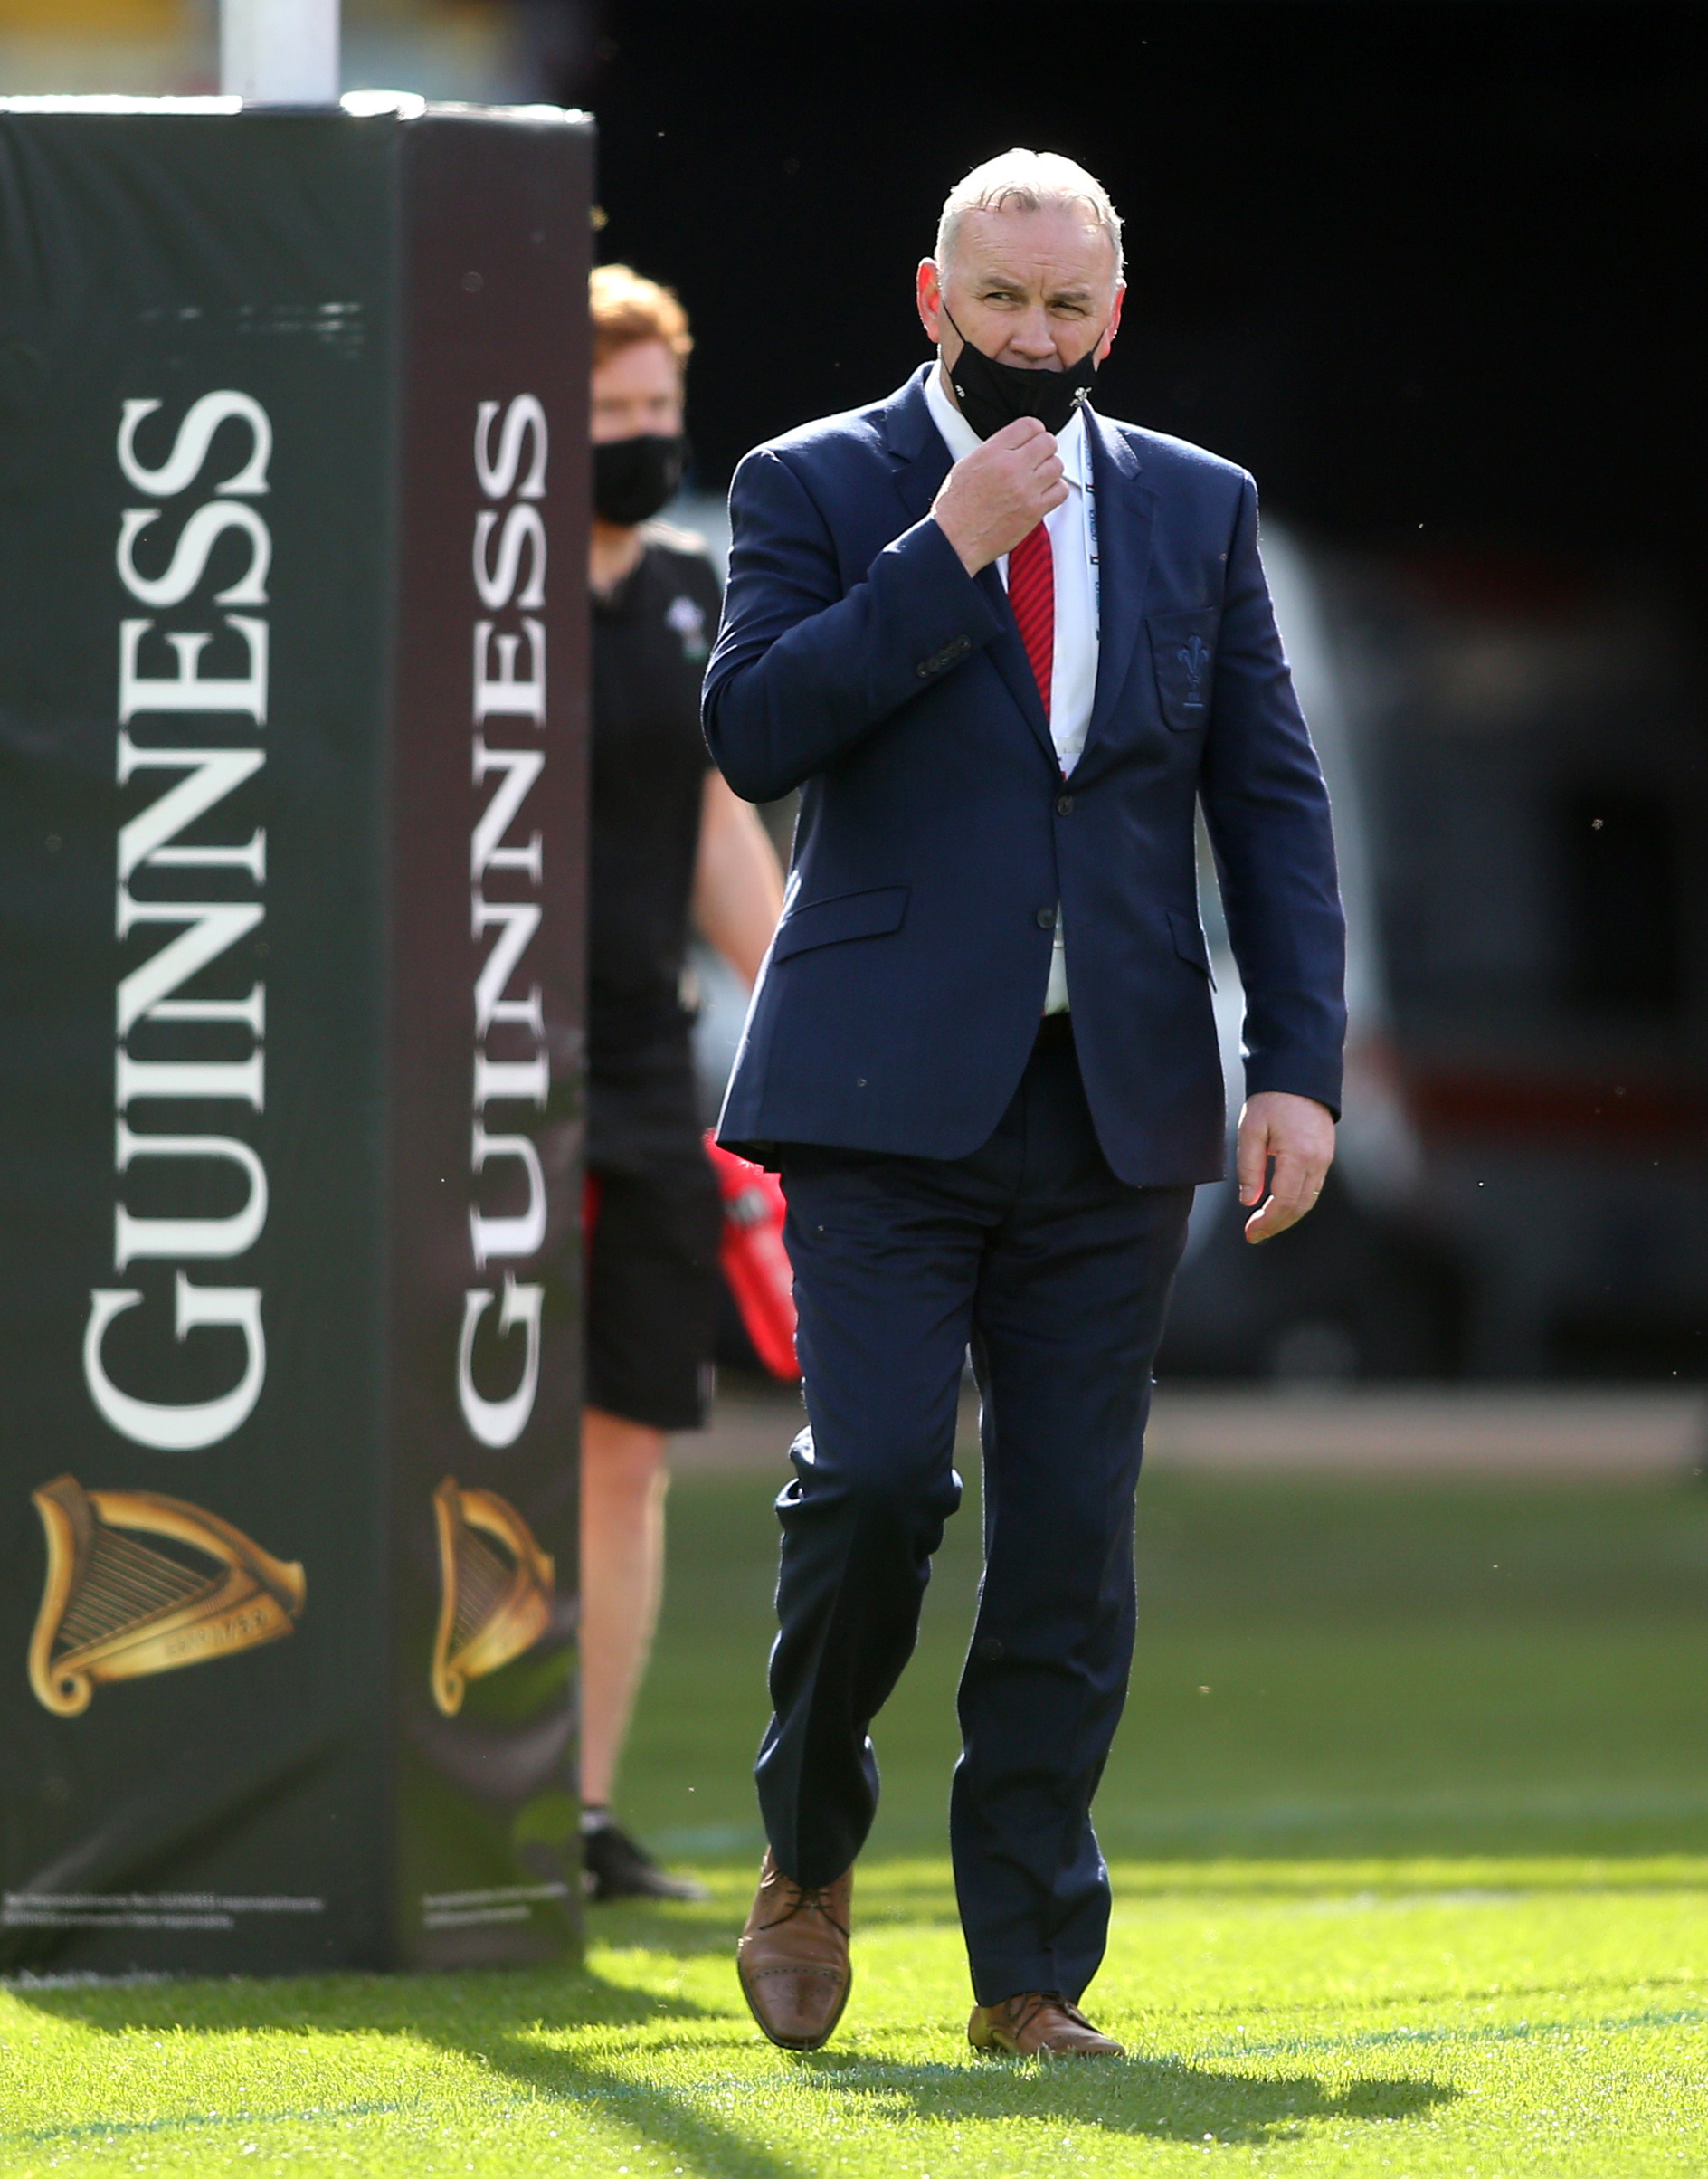 Wales head coach Wayne Pivac during the warm up before the Guinness Six Nations match at Stadio Olimpico, Rome. Picture date: Saturday March 13, 2021. PA Photo. See PA story RUGBYU Wales. Photo credit should read: Marco Iacobucci/PA Wire. ..RESTRICTIONS: